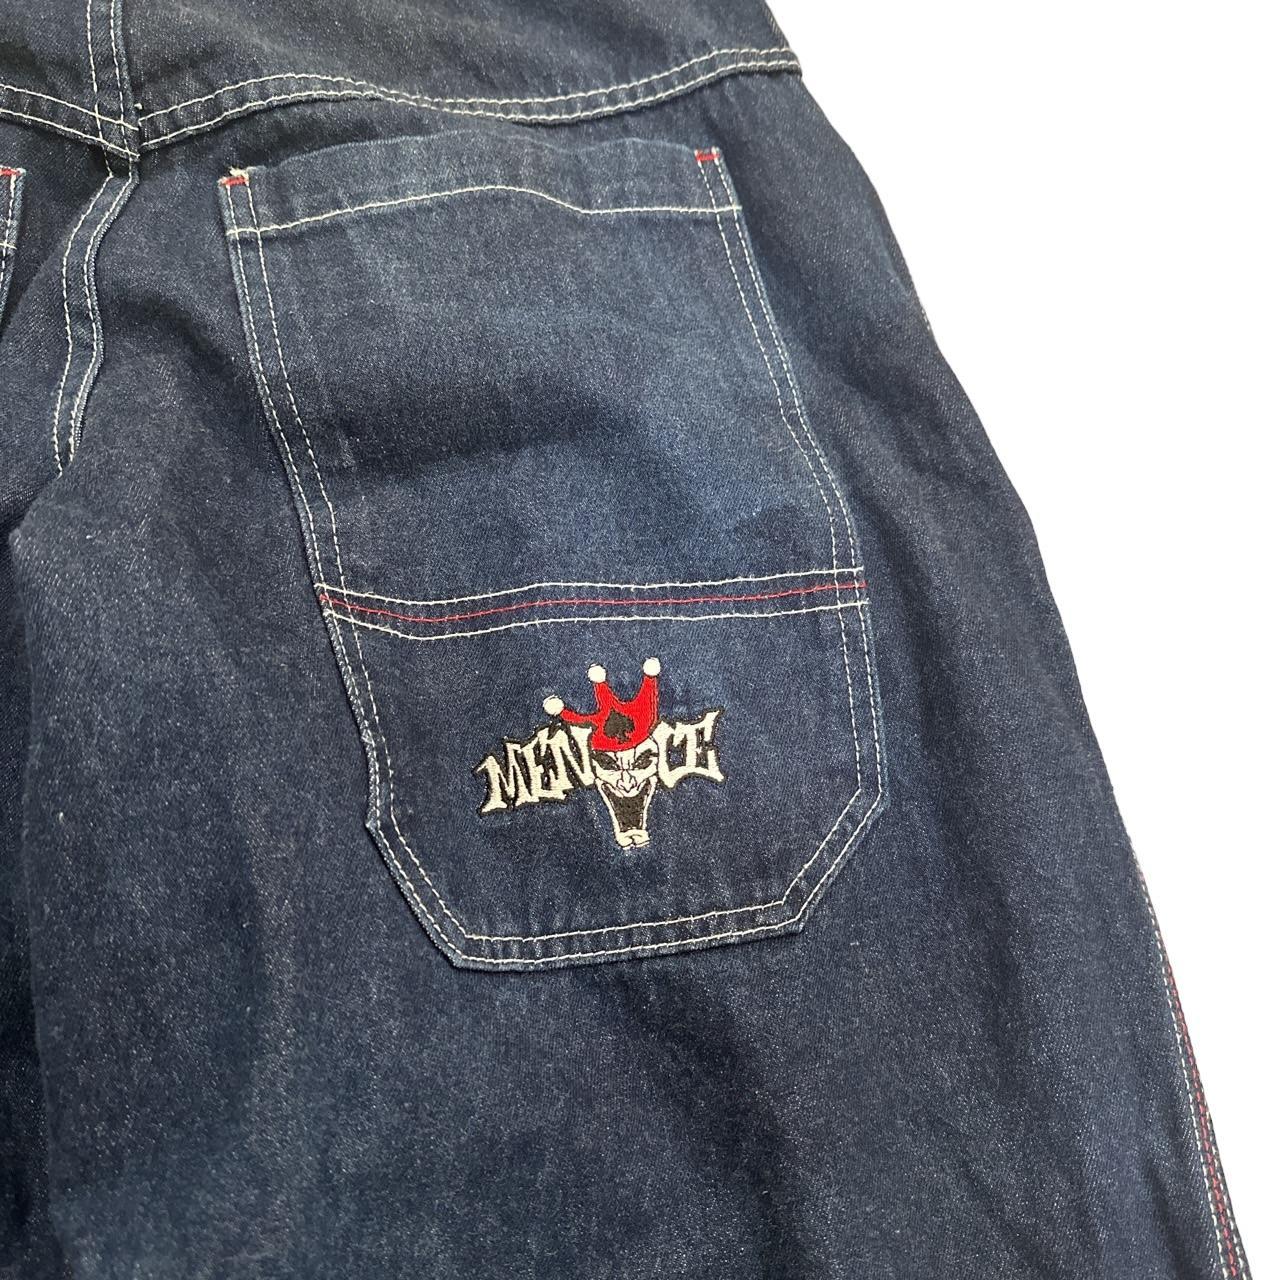 Menace Jeans clown ace embroidery, similar to... - Depop